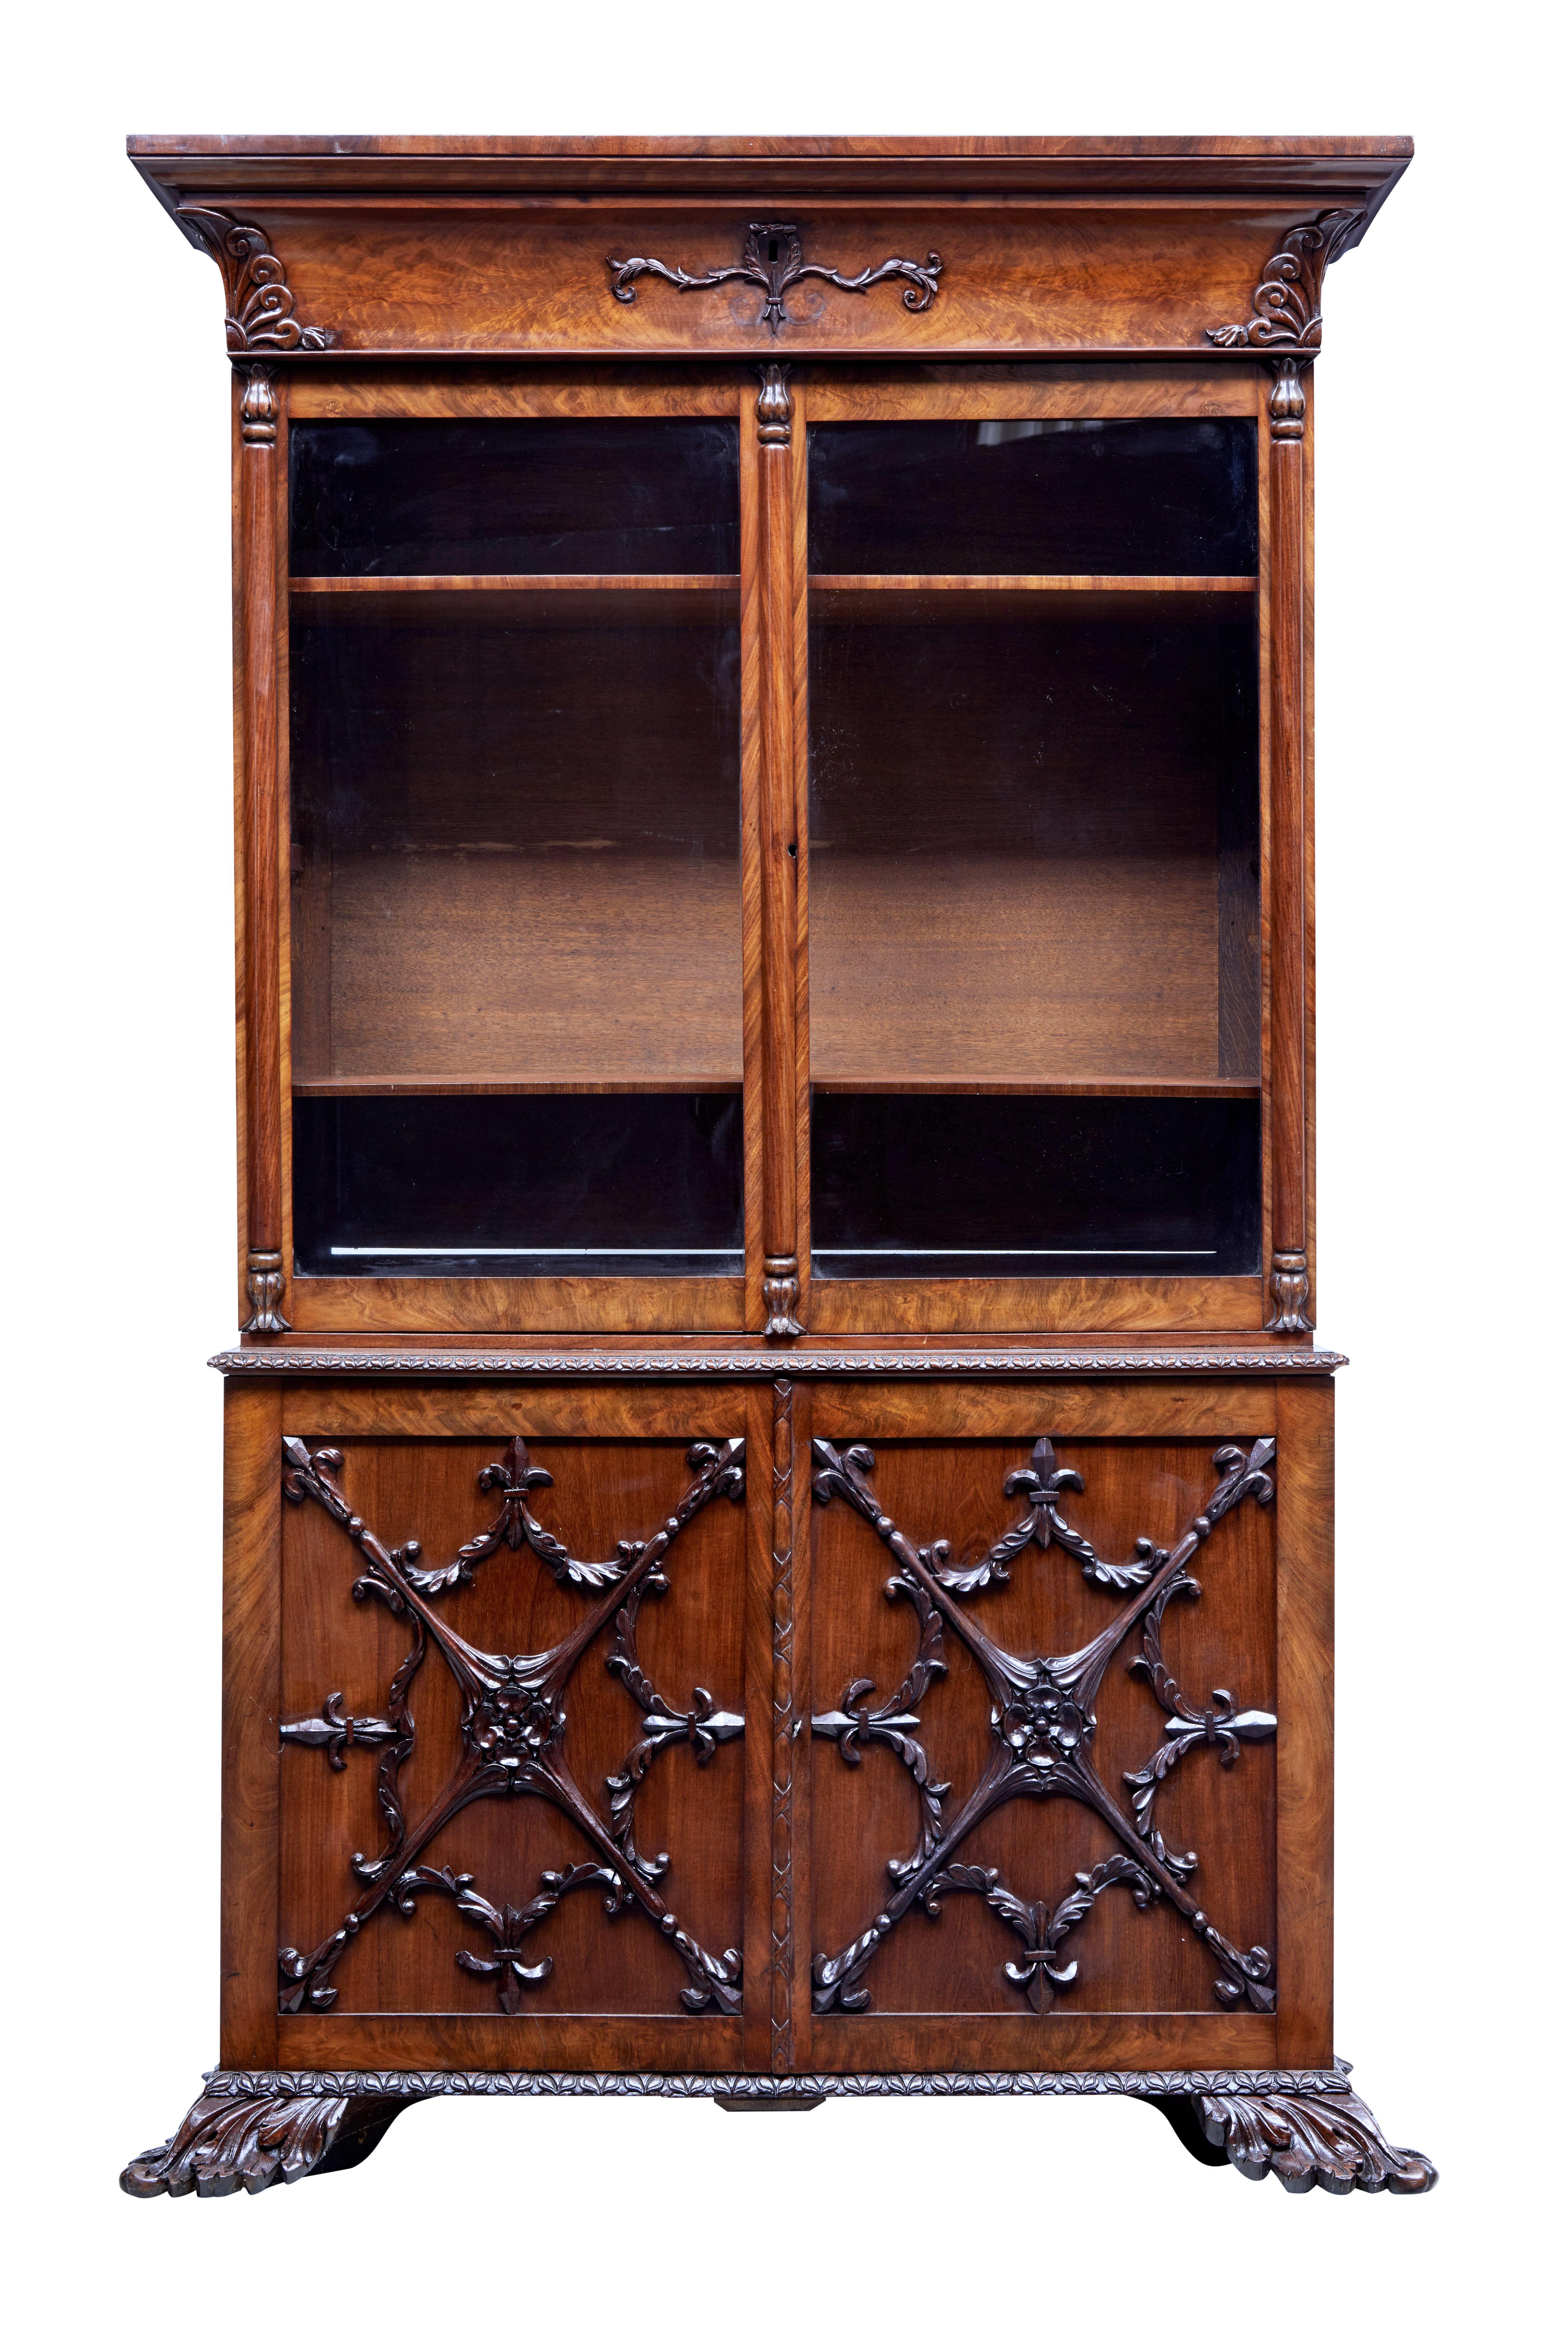 Rare danish carved mahogany bookcase, circa 1840.

2 part bookcase. Top section with hidden drawer below the cornice. Applied carving to corners and around the key hole. Double glazed doors open to 2 shelves with fixed height brackets for a